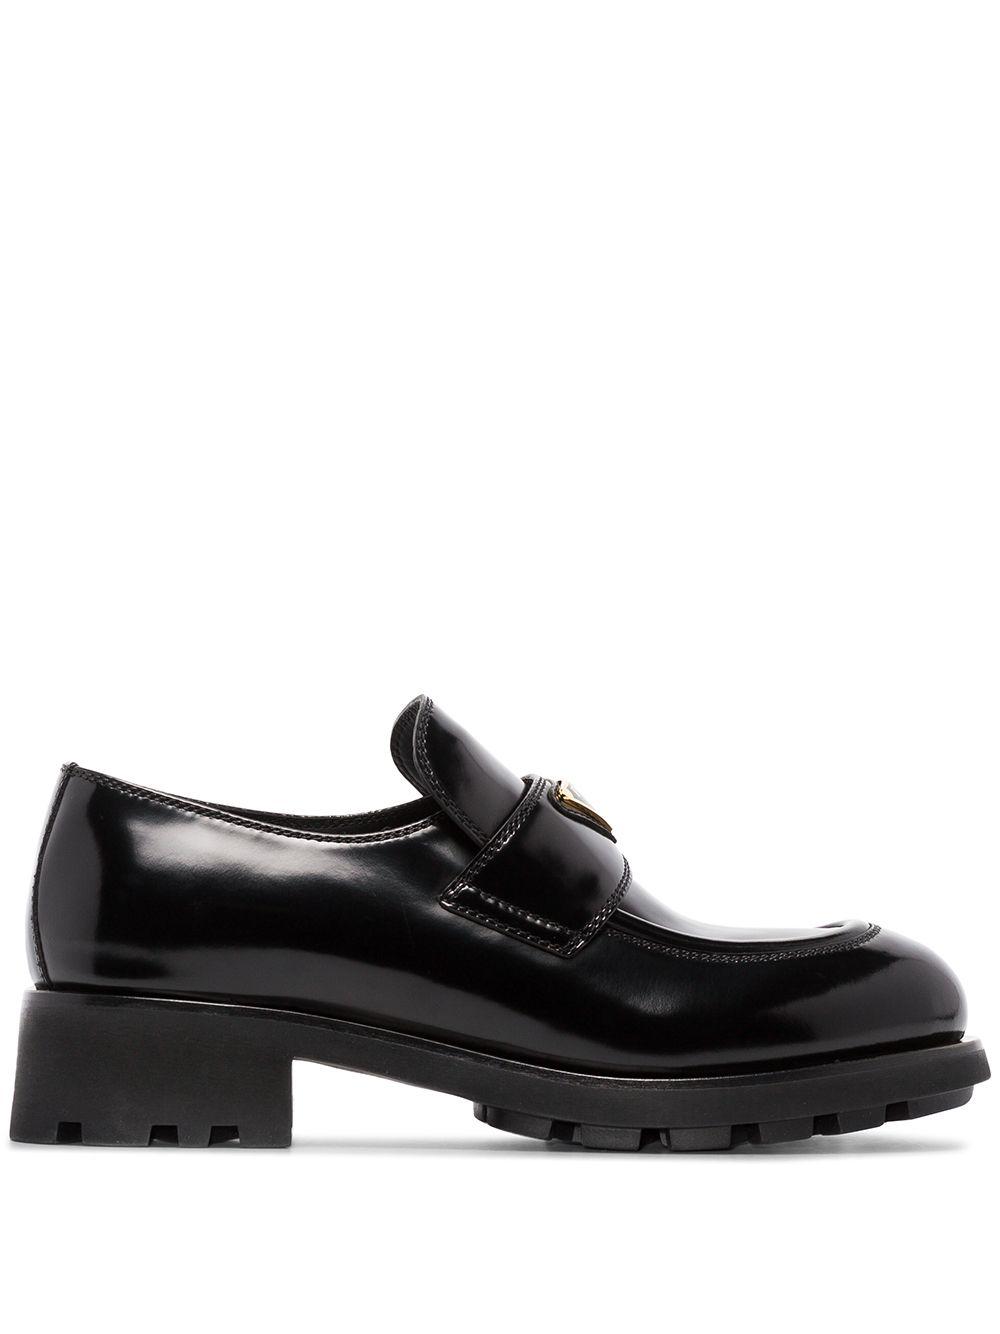 Prada Leather Chunky Logo Plaque Loafers in Black | Lyst